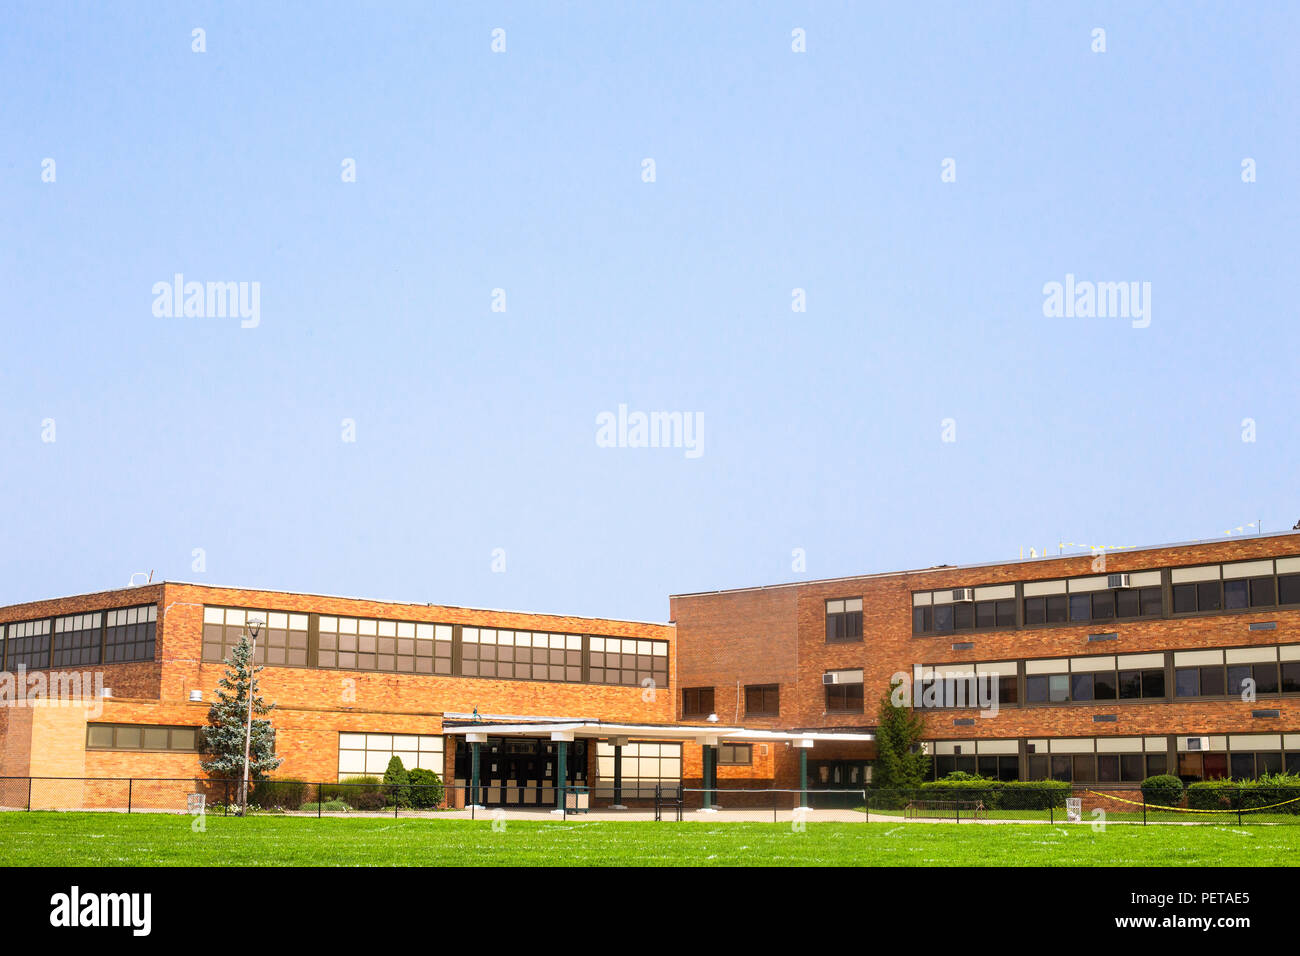 View of typical American school building exterior Stock Photo